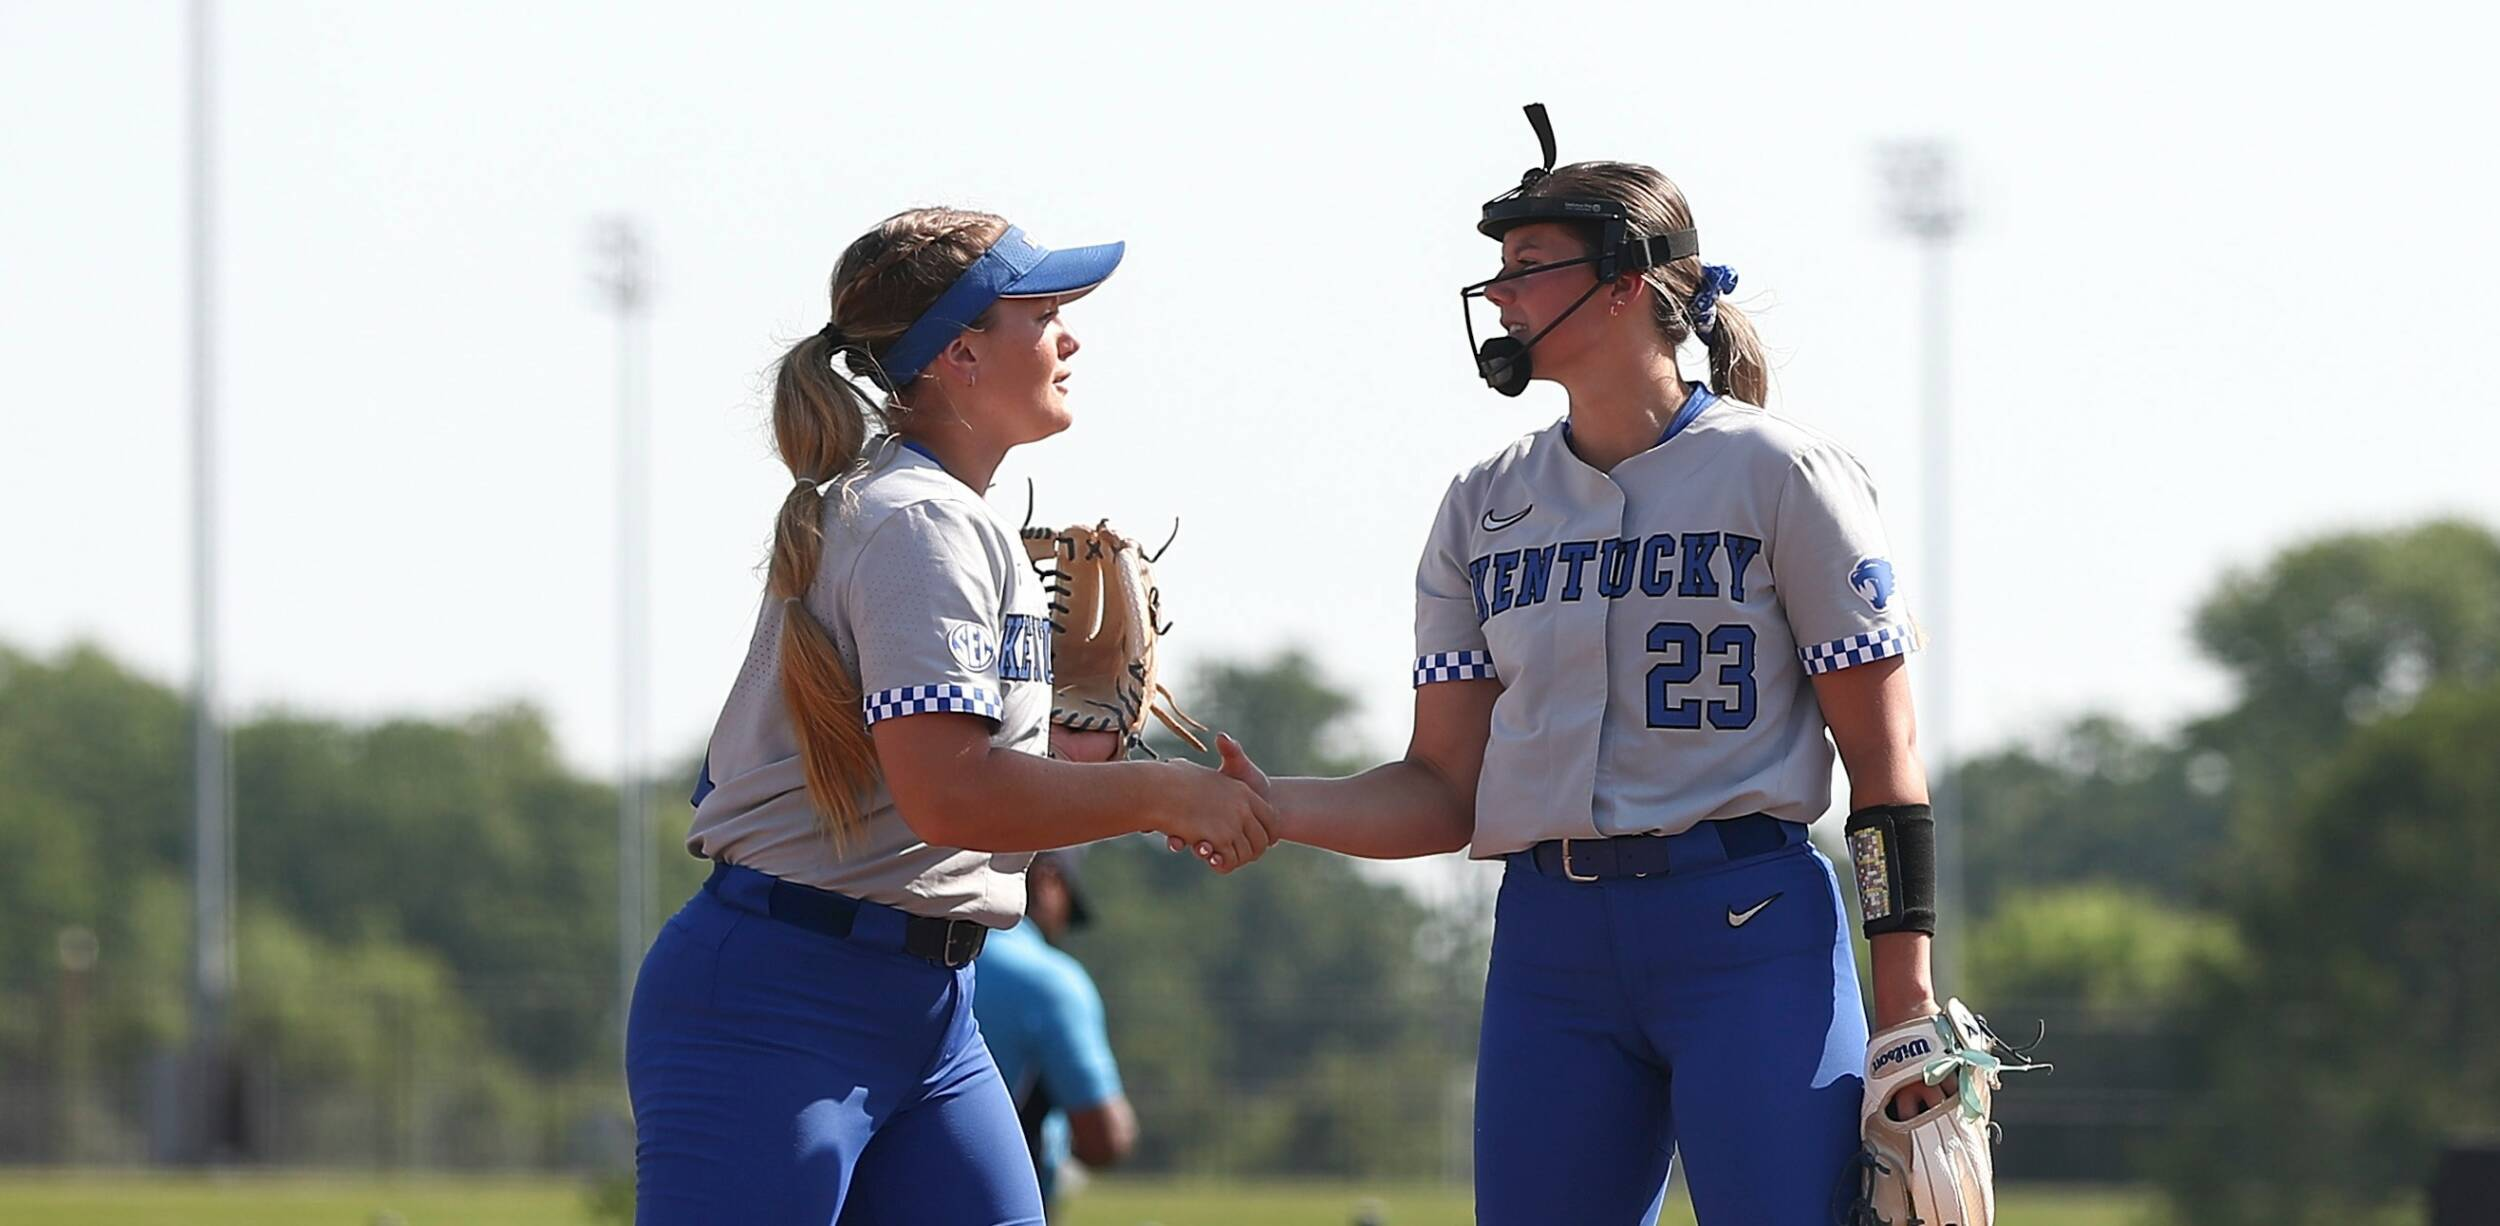 Coffel & Schoonover Win NFCA National Player/Pitcher of the Week